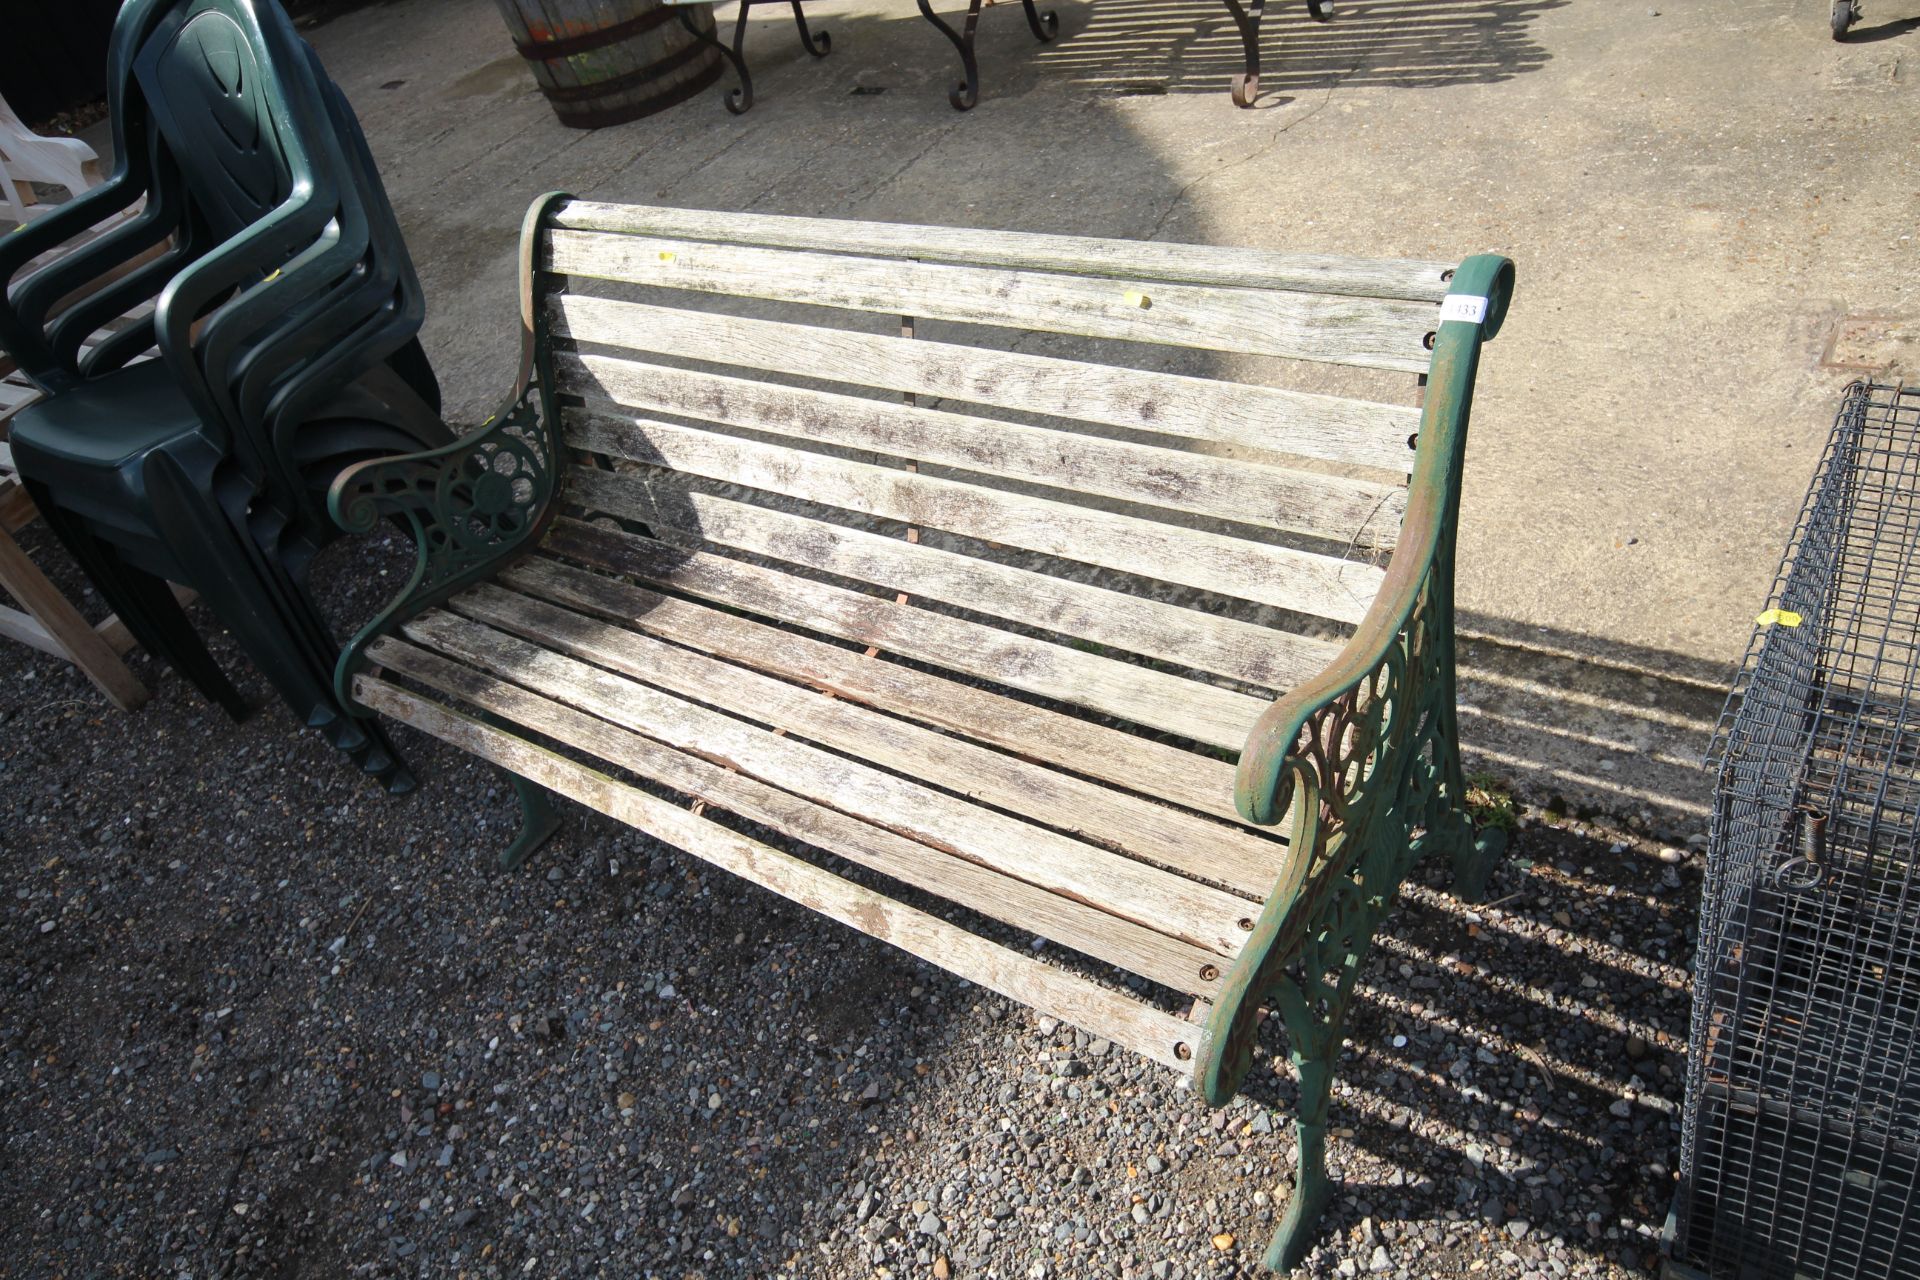 A two seater wooden slatted garden bench with gree